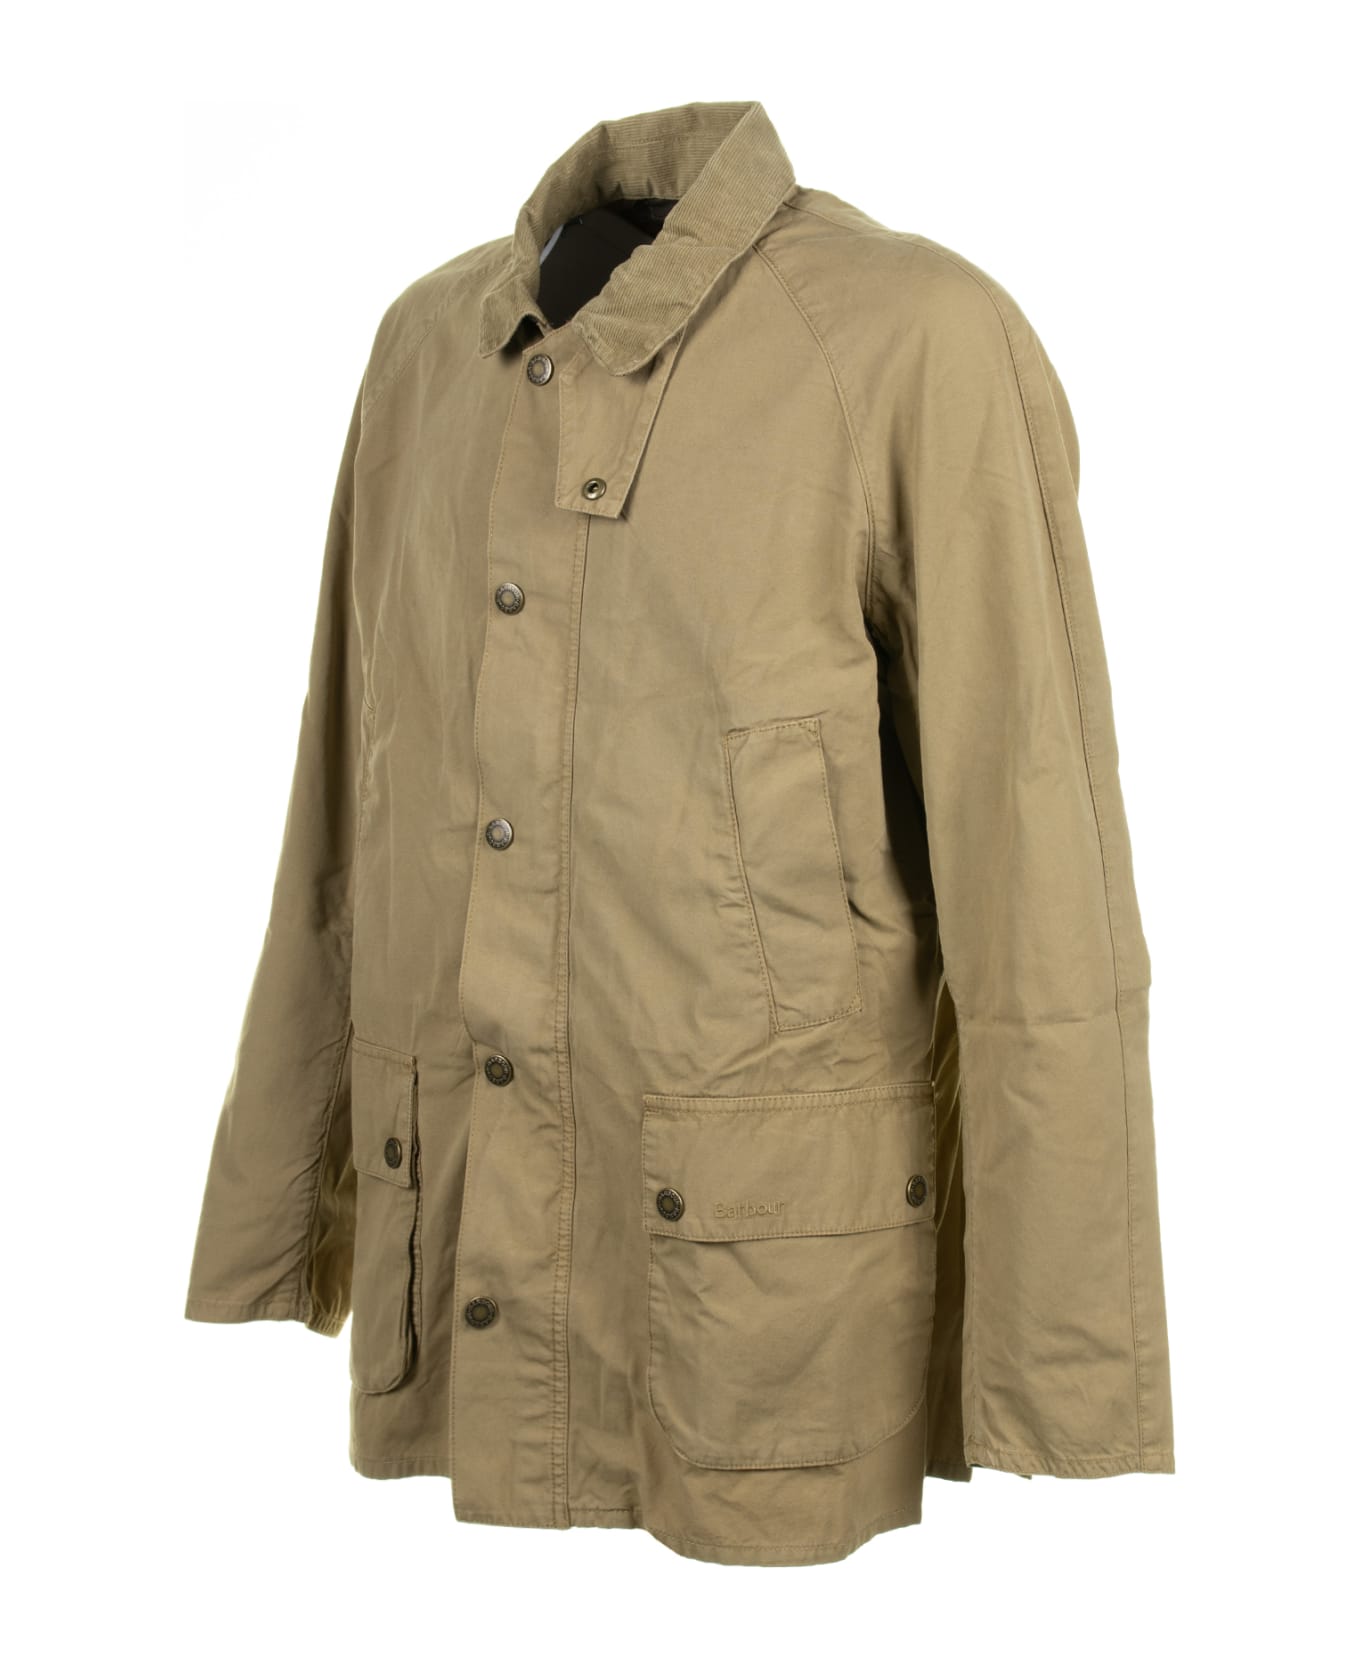 Barbour Cotton Jacket With Pockets And Buttons - STONE